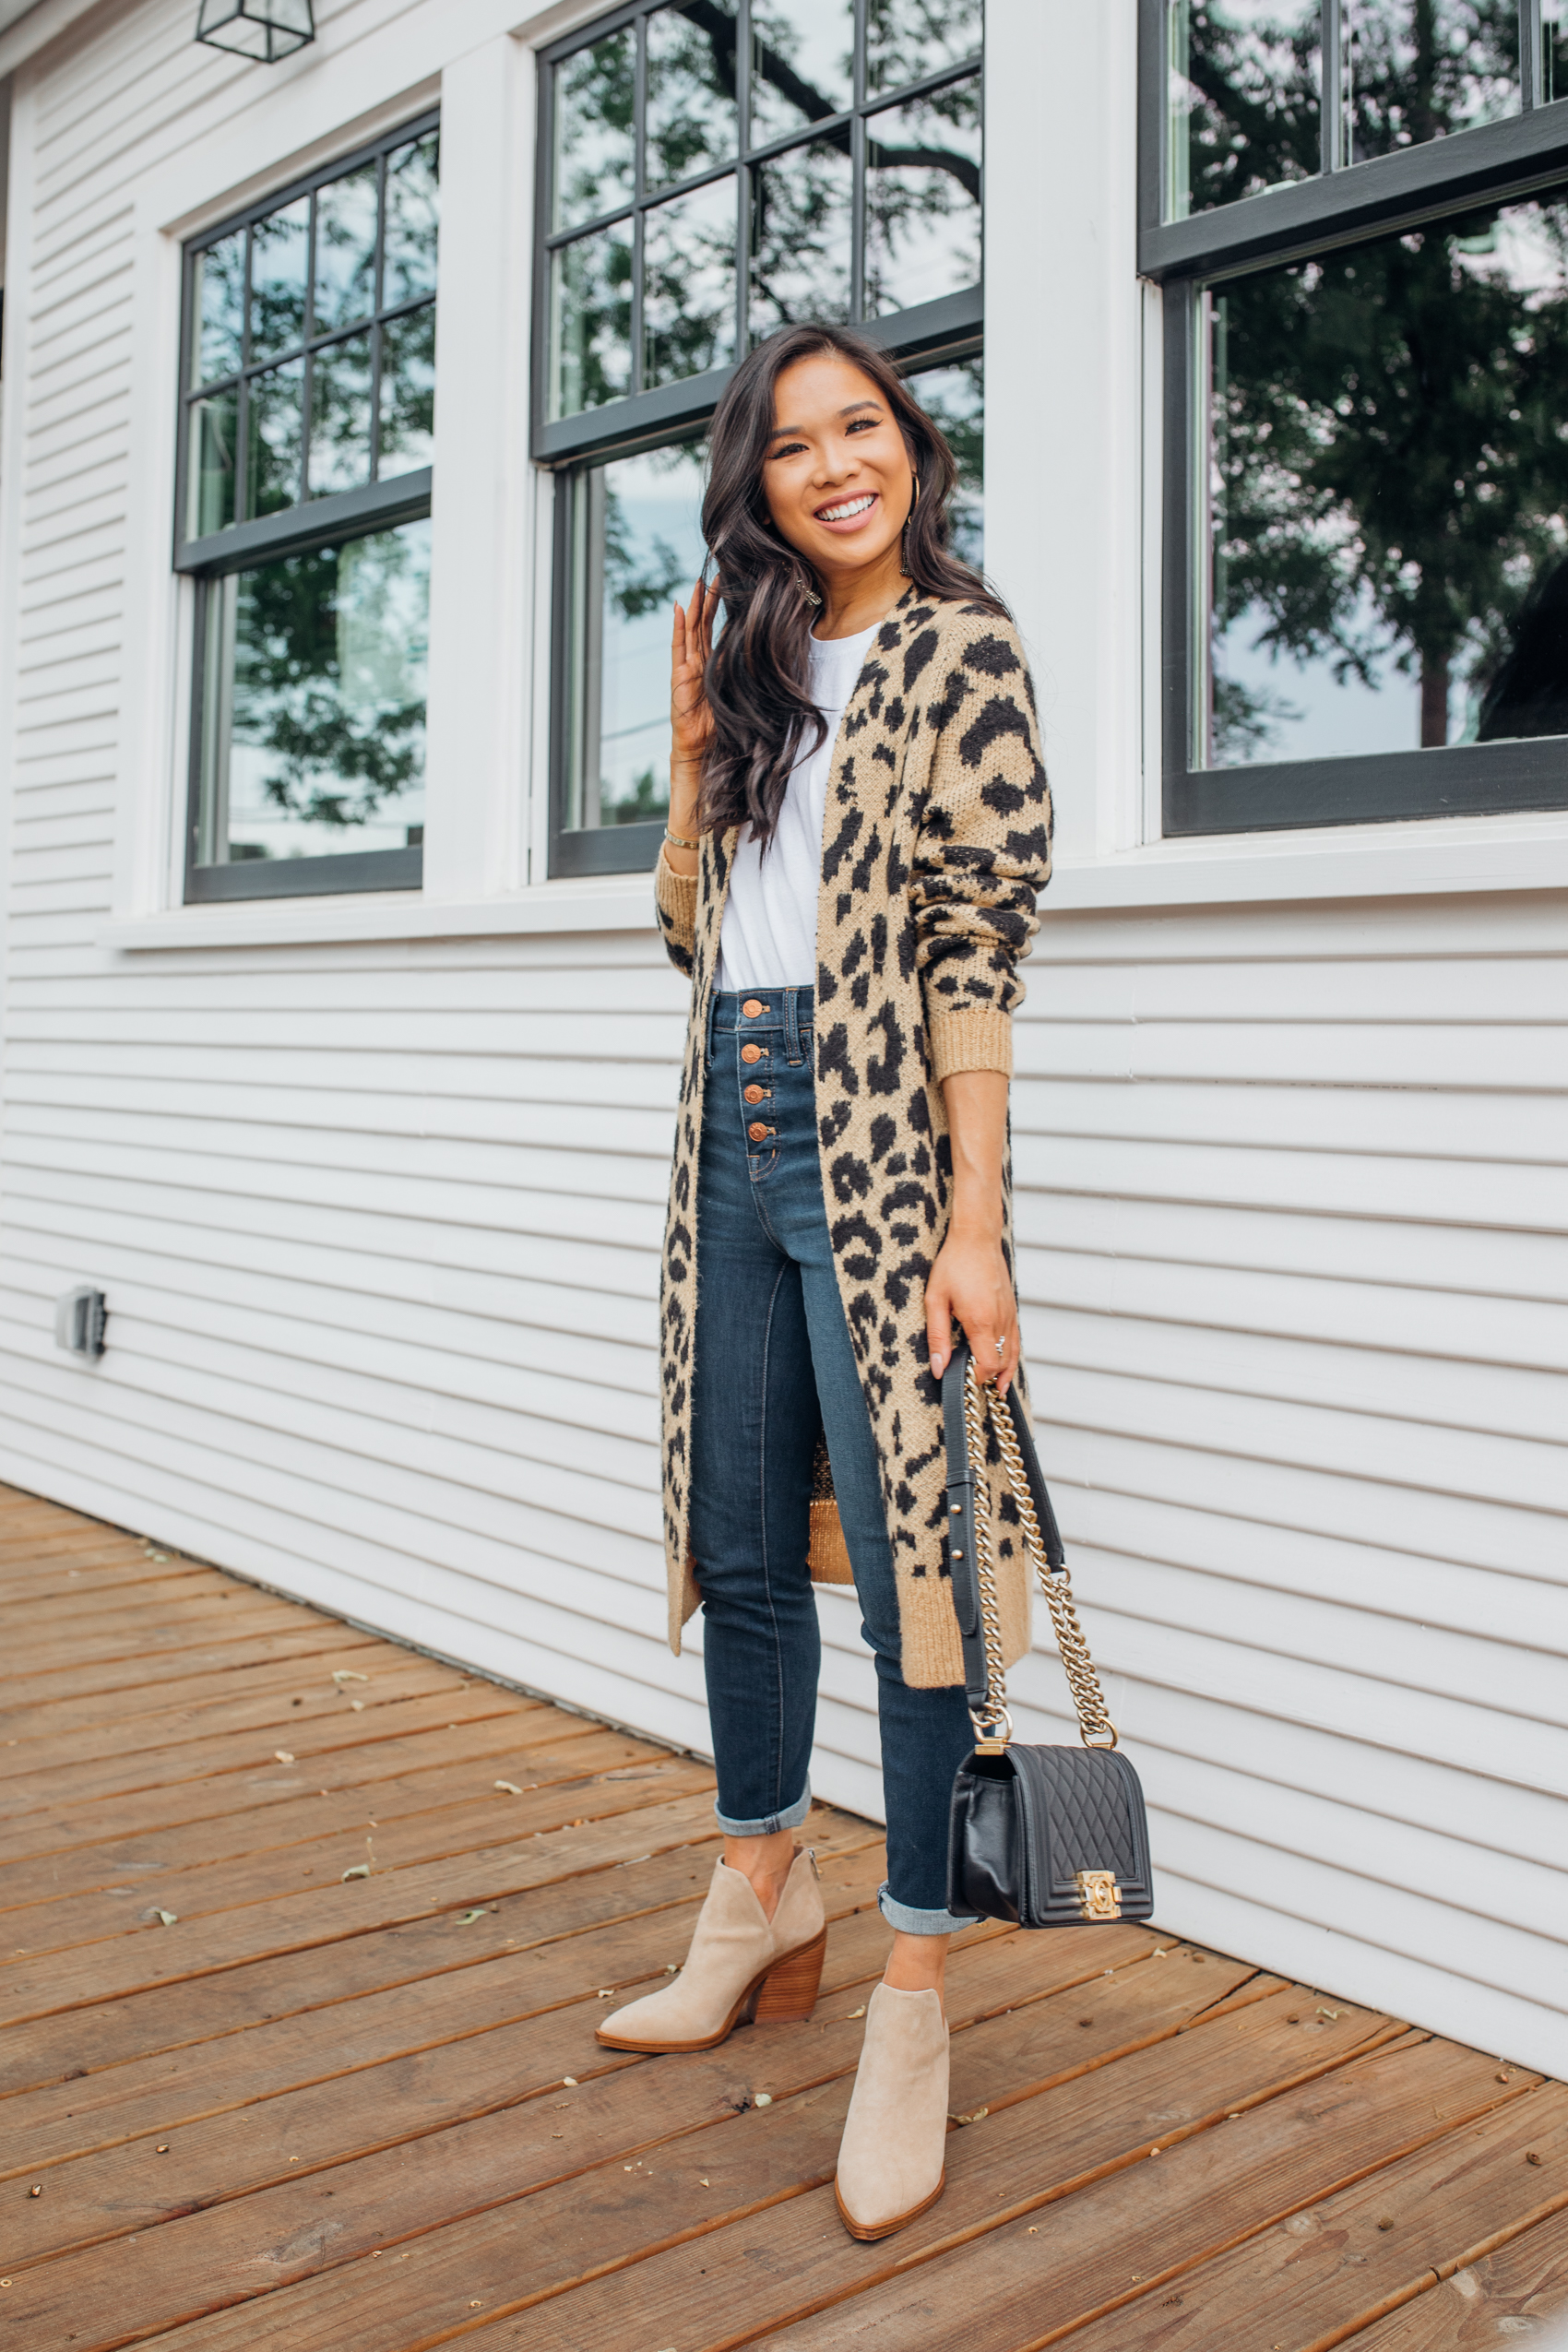 Blogger Hoang-Kim shares a $30 leopard cardigan perfect for fall outfits